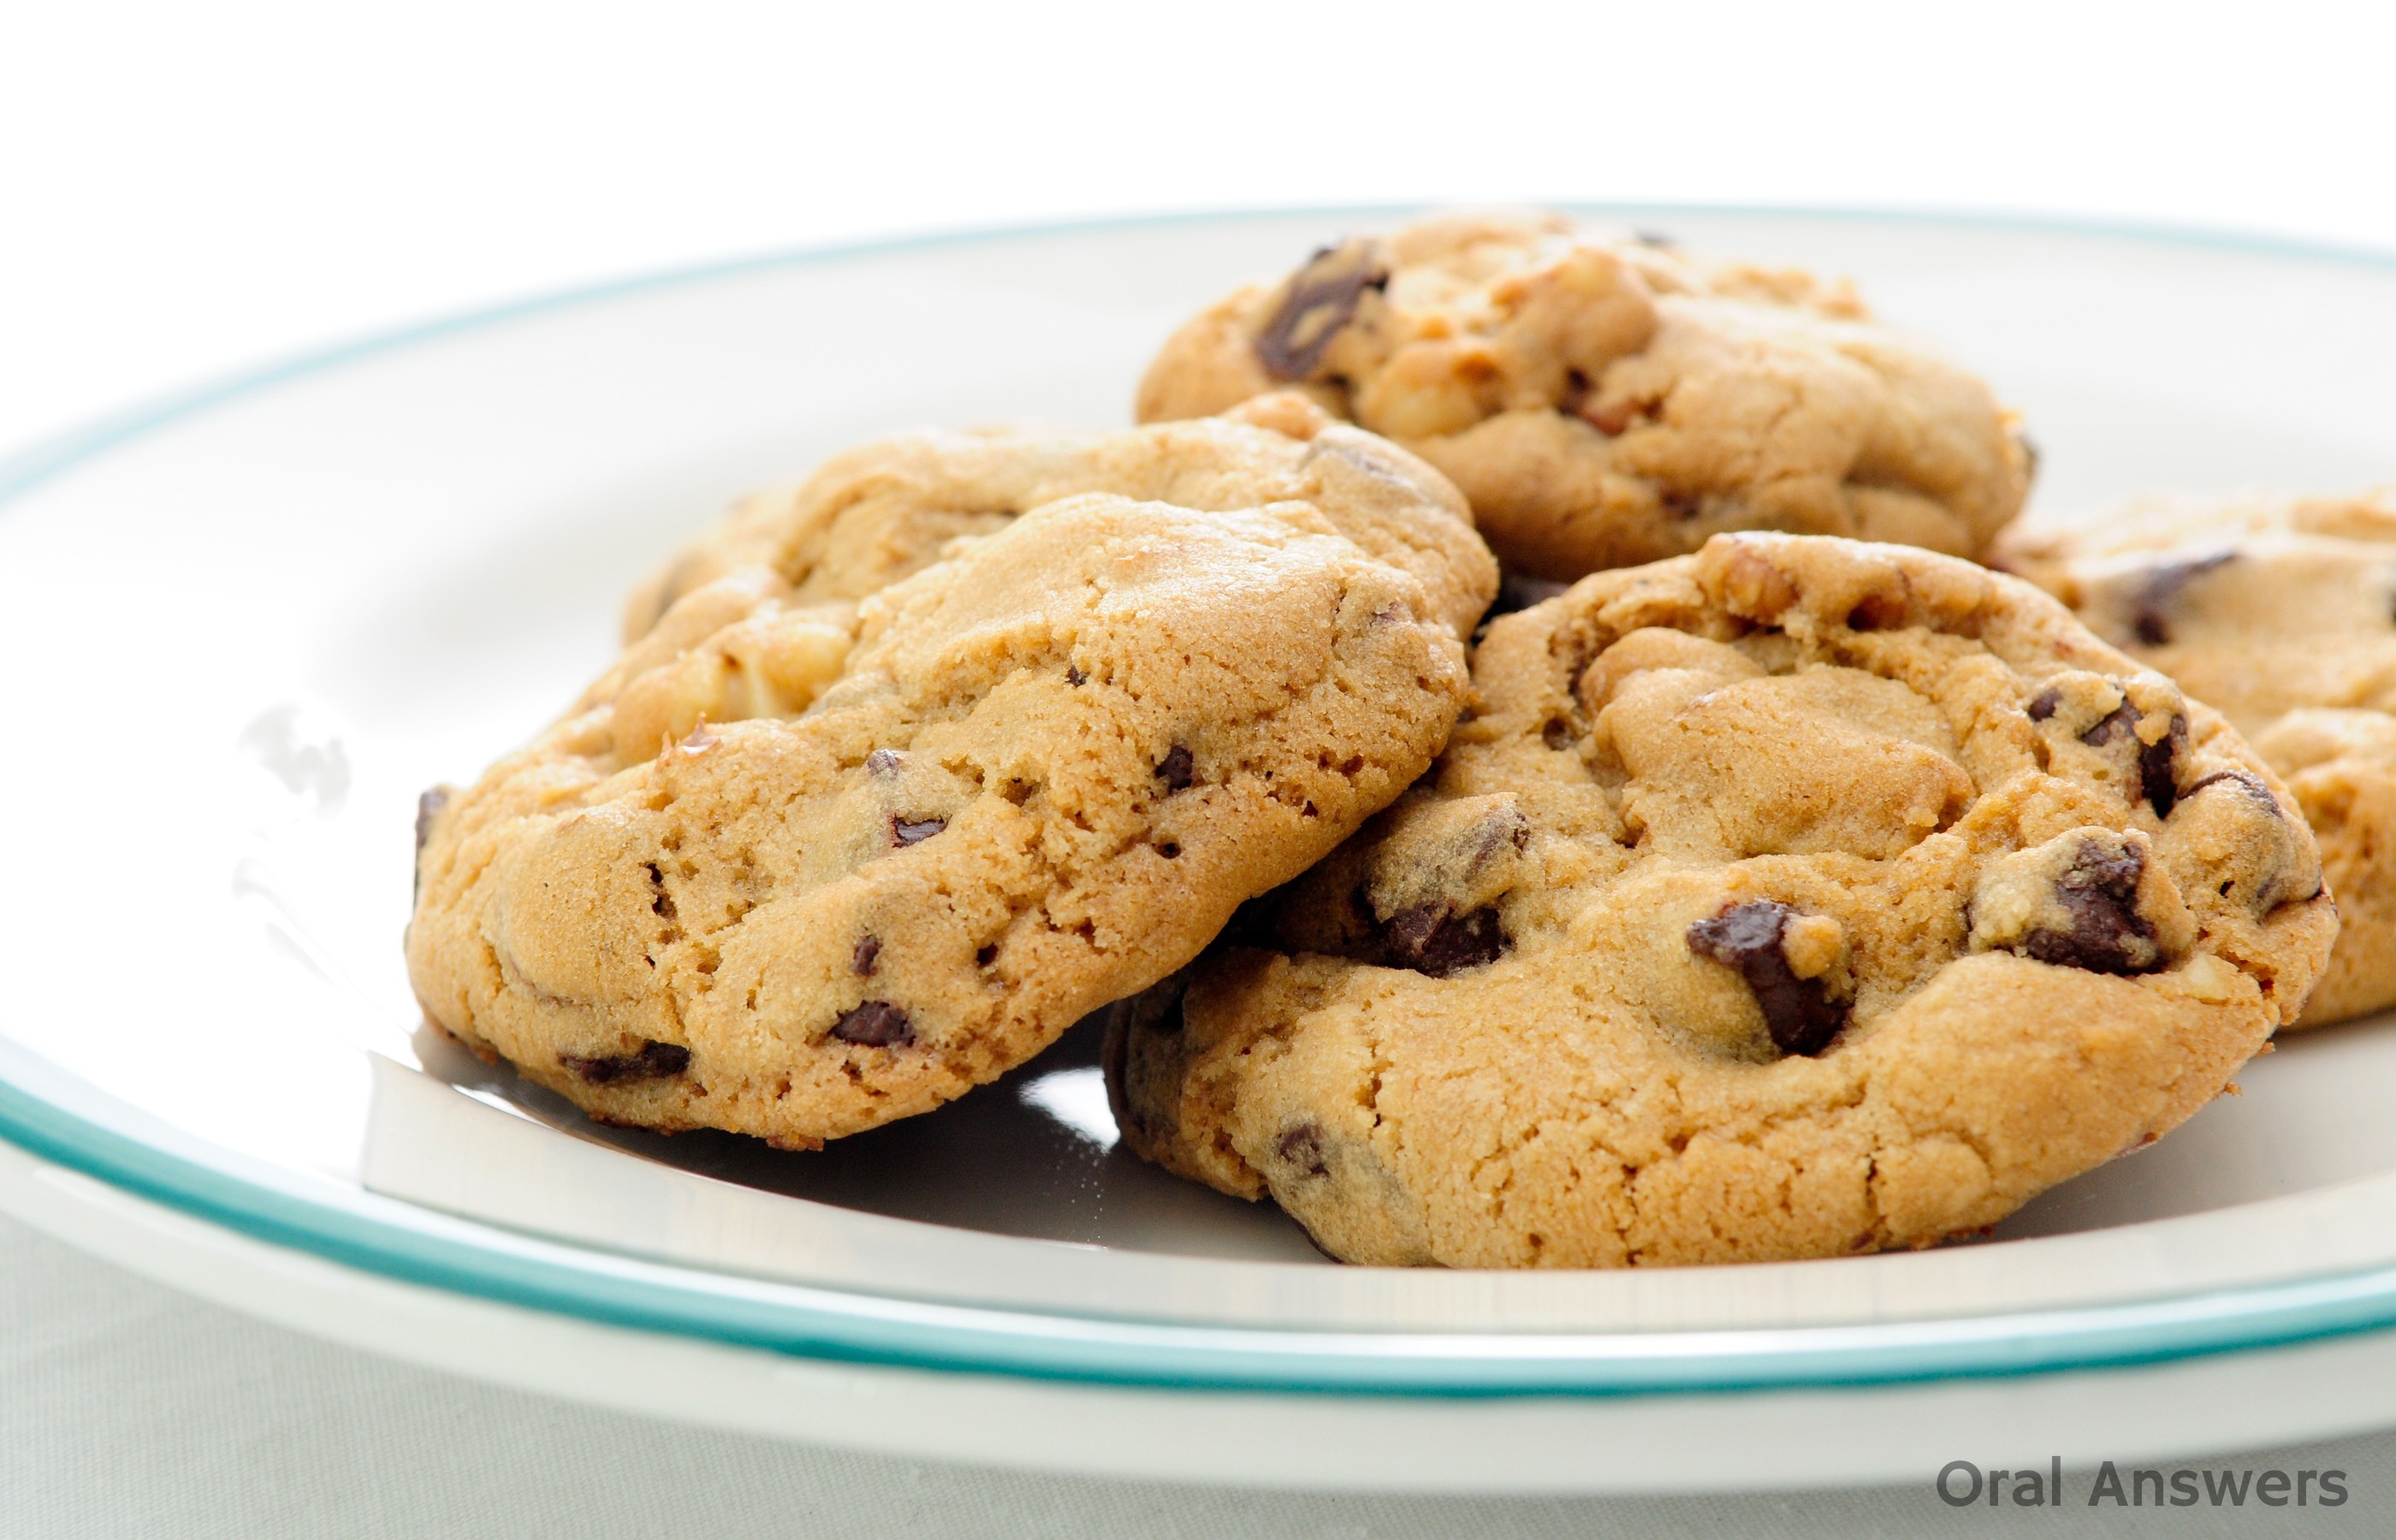 Cookies - Fermentable Carbohydrates